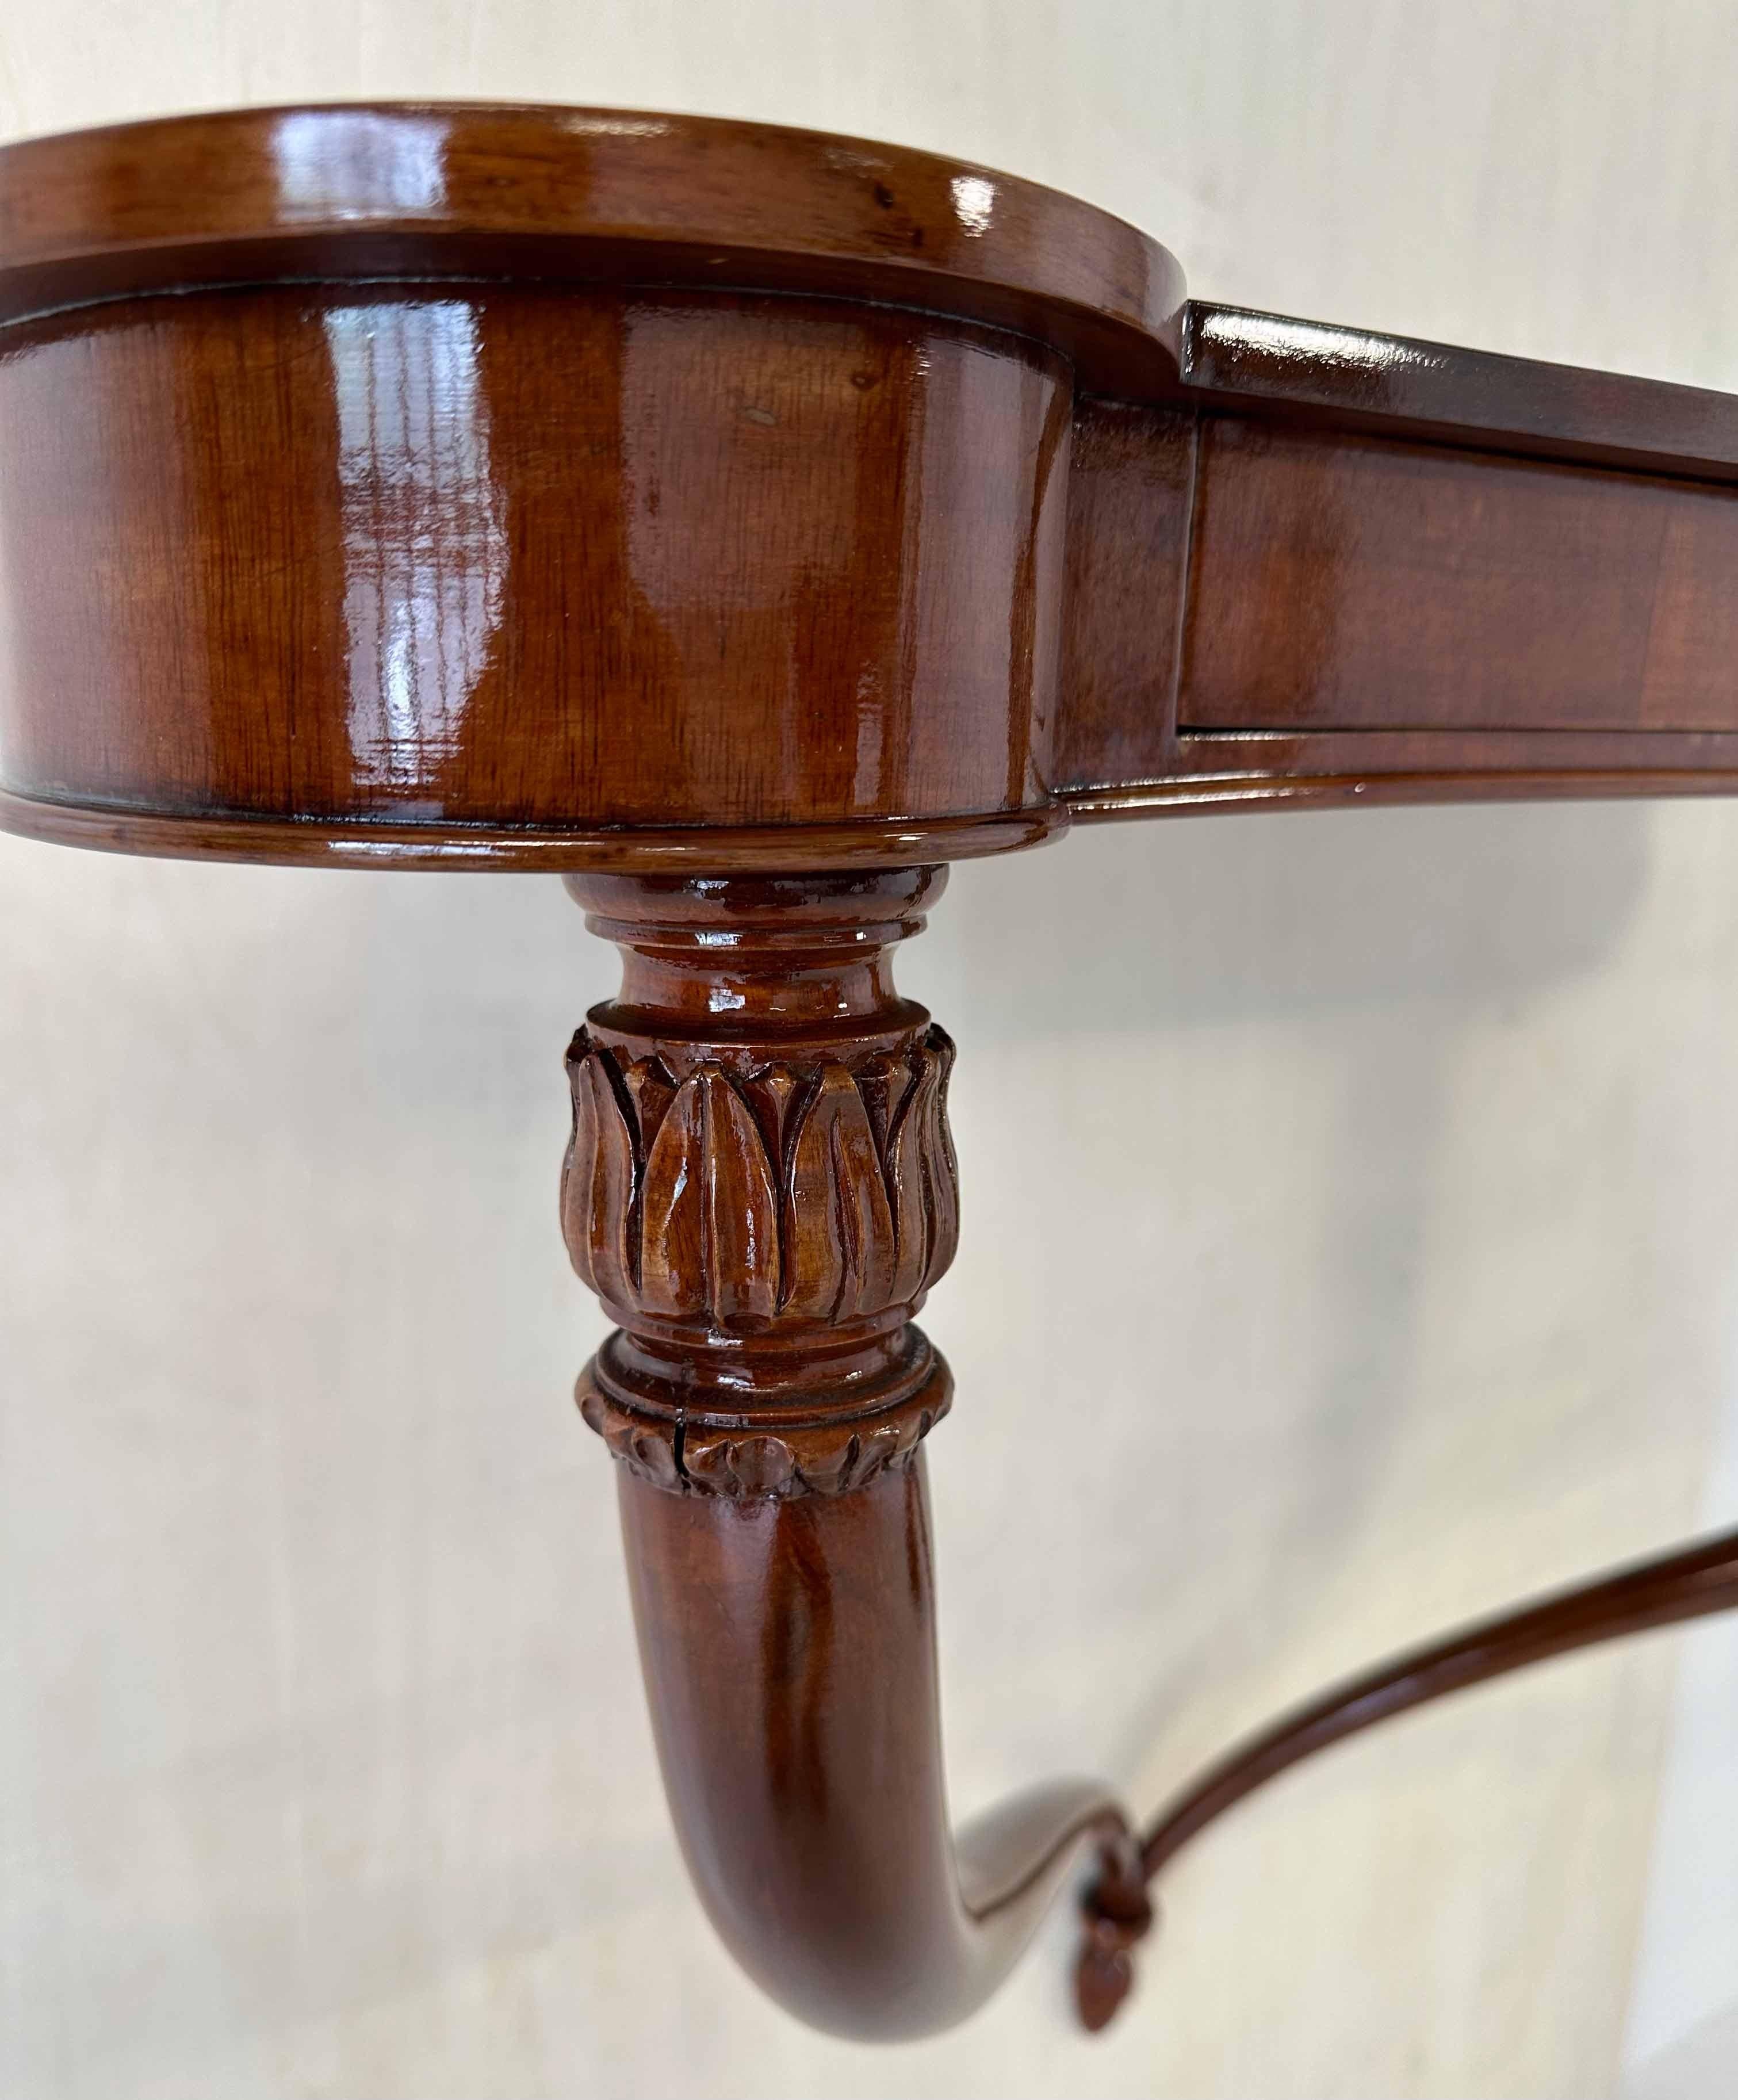 Italian Art Deco Walnut Hanging Console Table, 1930s For Sale 1